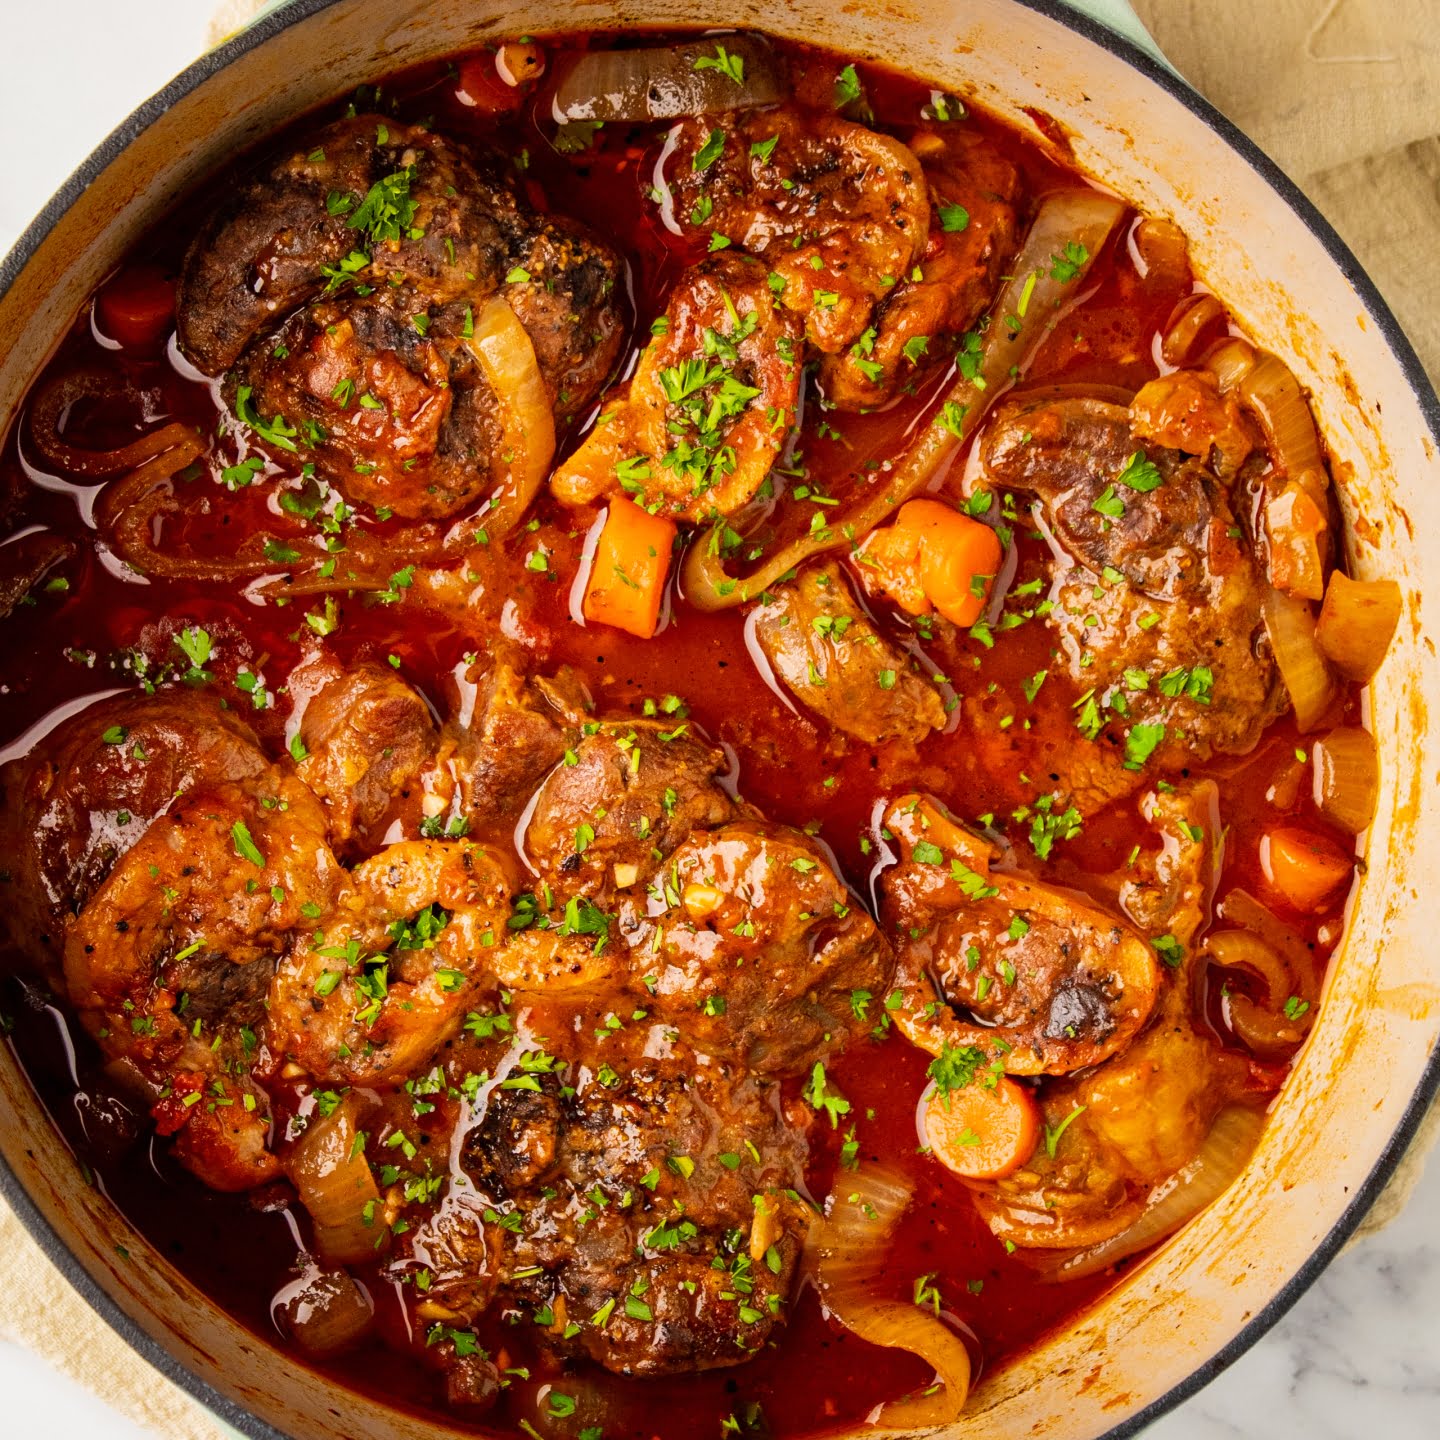 Beef shanks - featured